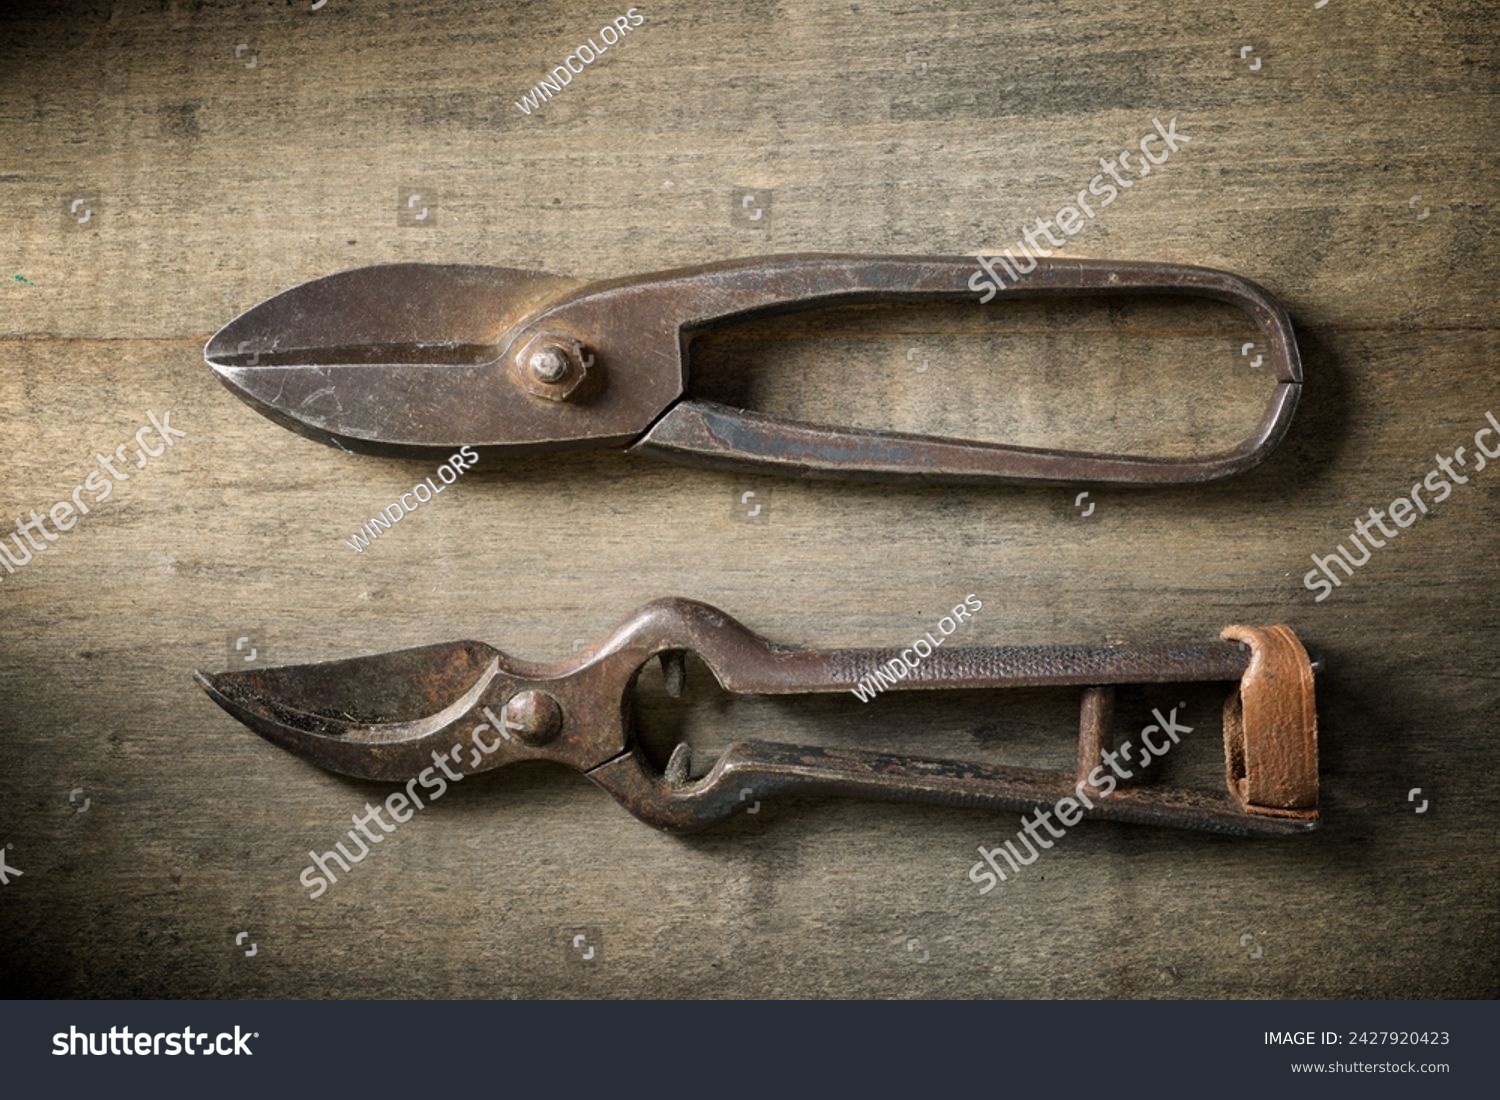 Close up of a pair of old disused pliers on a work bench. #2427920423